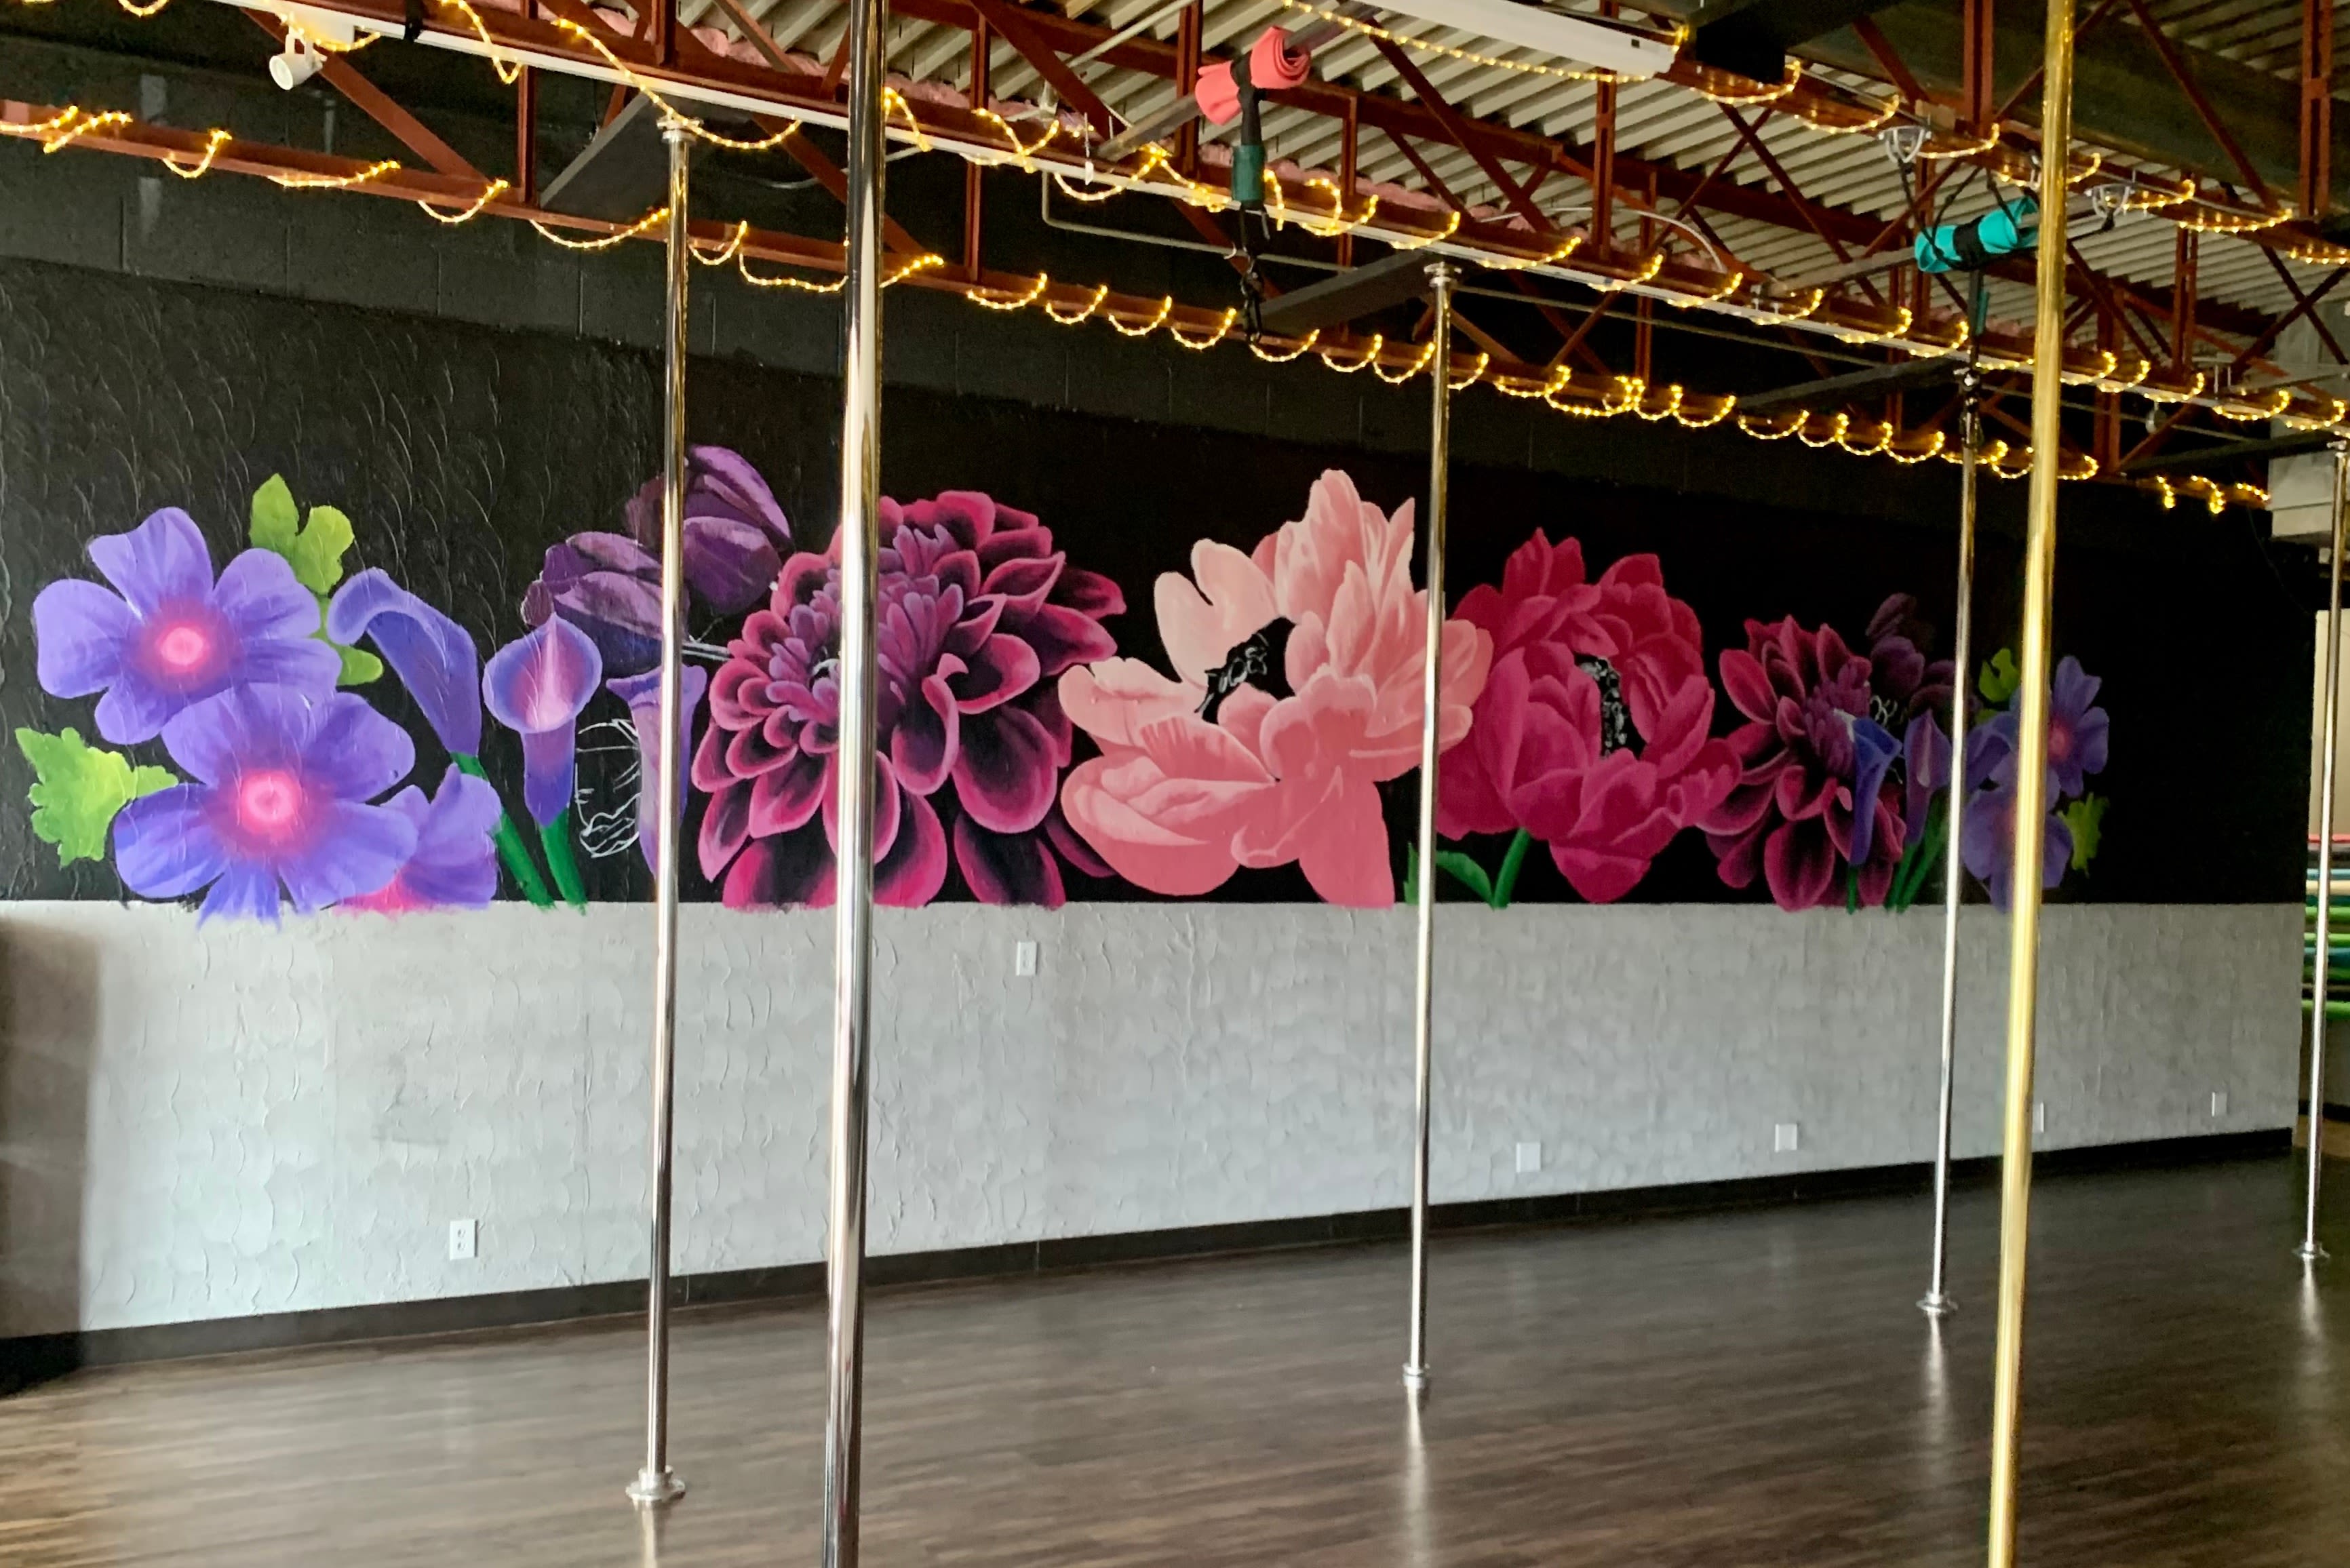 Fit Body & Pole – Pole Dance & Fitness in Colorado Springs